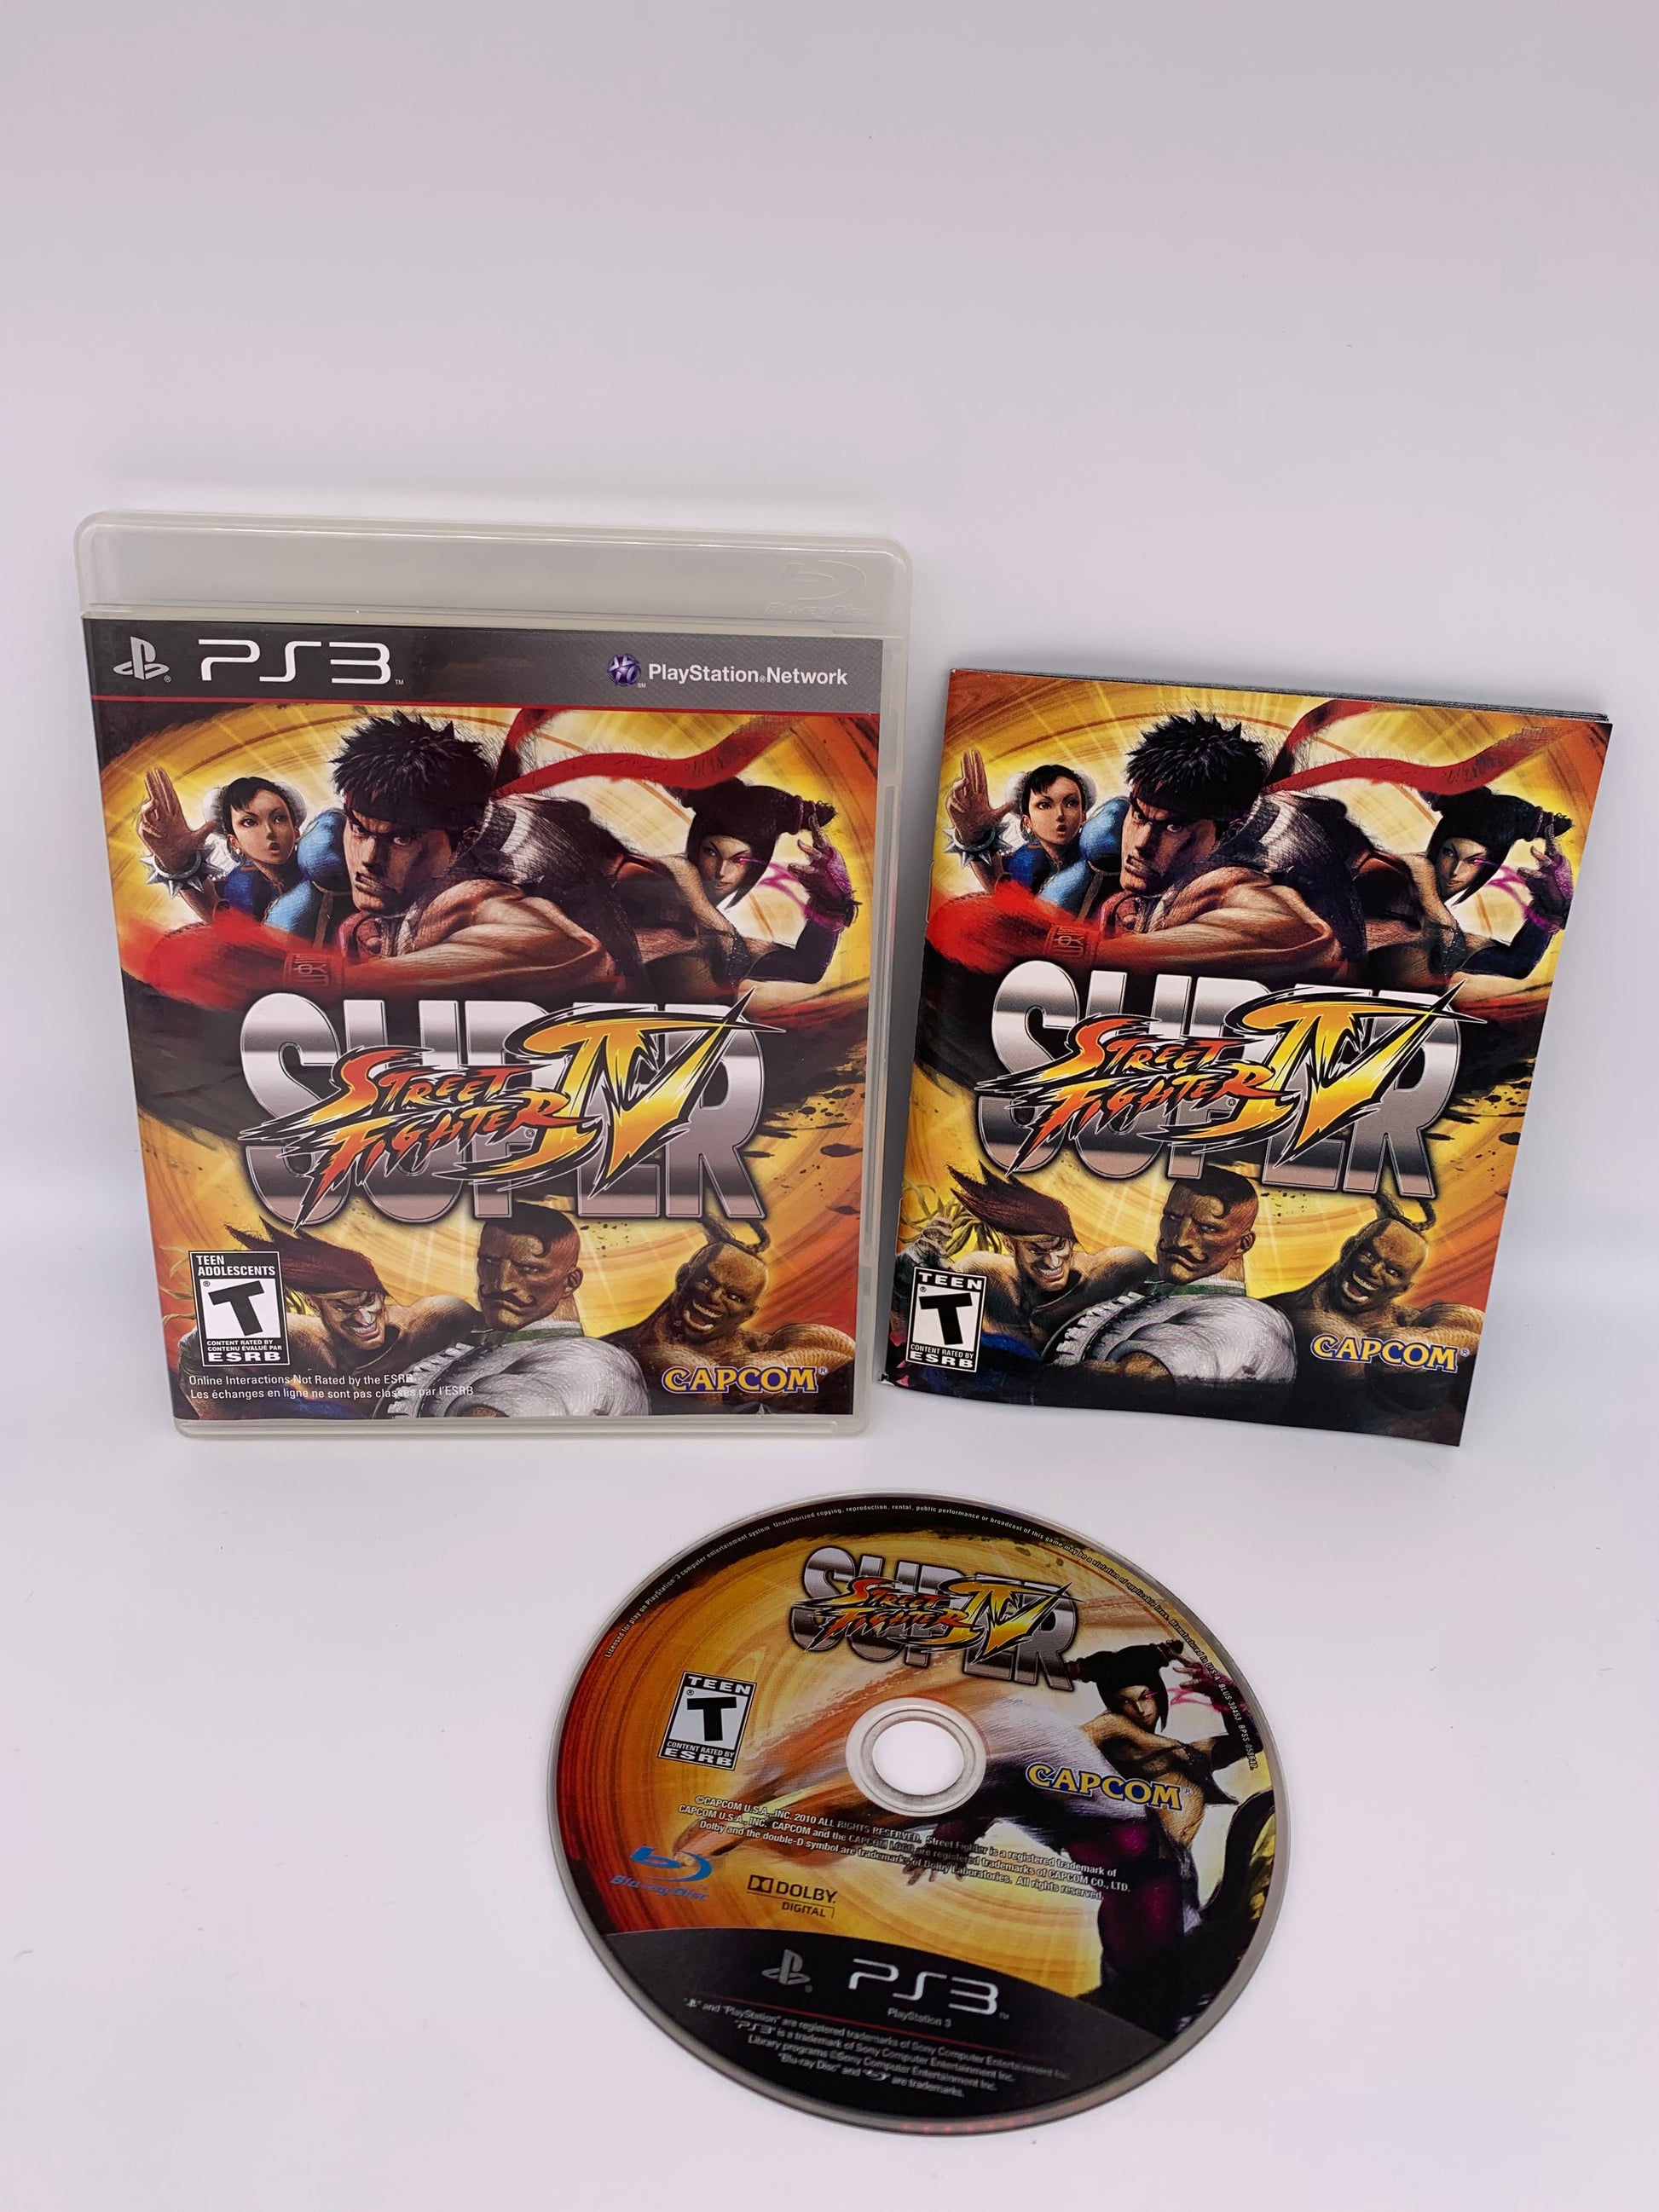 PiXEL-RETRO.COM : SONY PLAYSTATION 3 PS3 COMPLETE GAME BOX MANUAL NTSC SUPER STREET FIGHTER IV